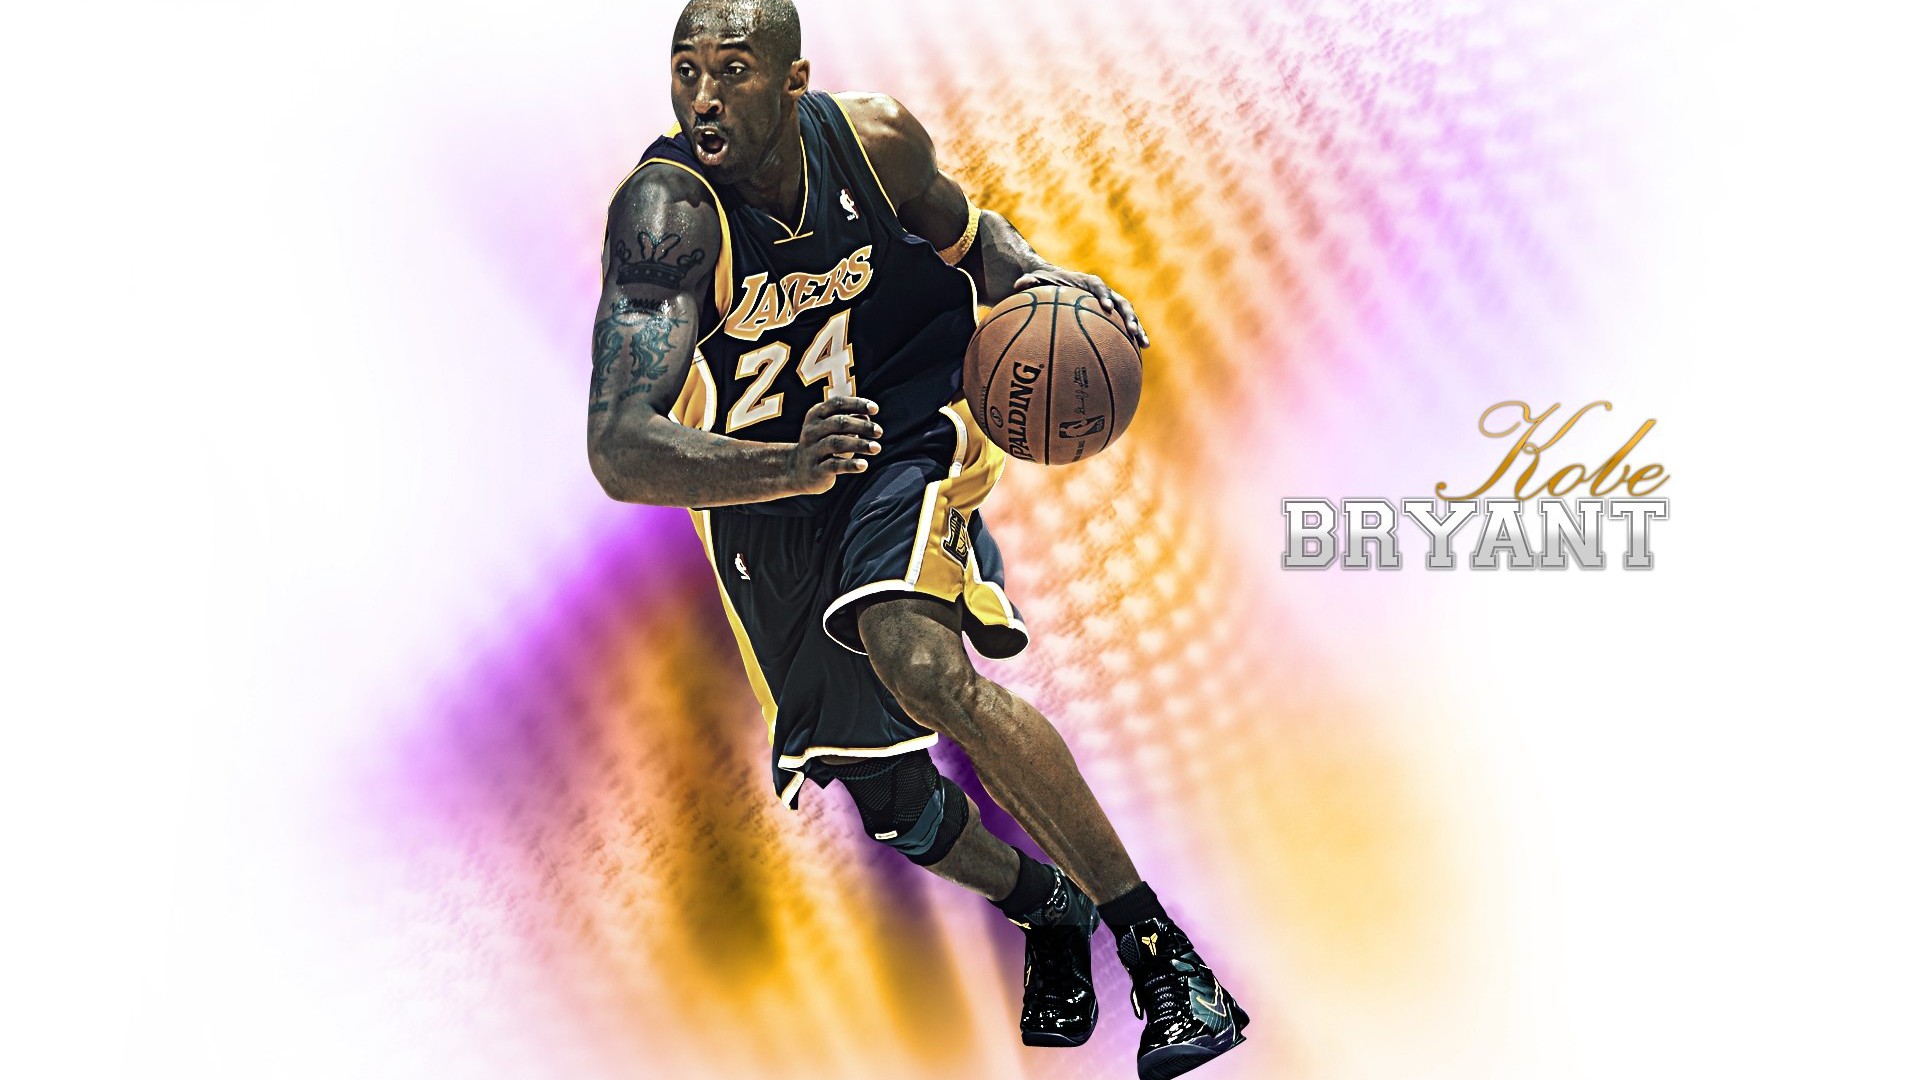 Los Angeles Lakers Wallpaper Oficial #15 - 1920x1080